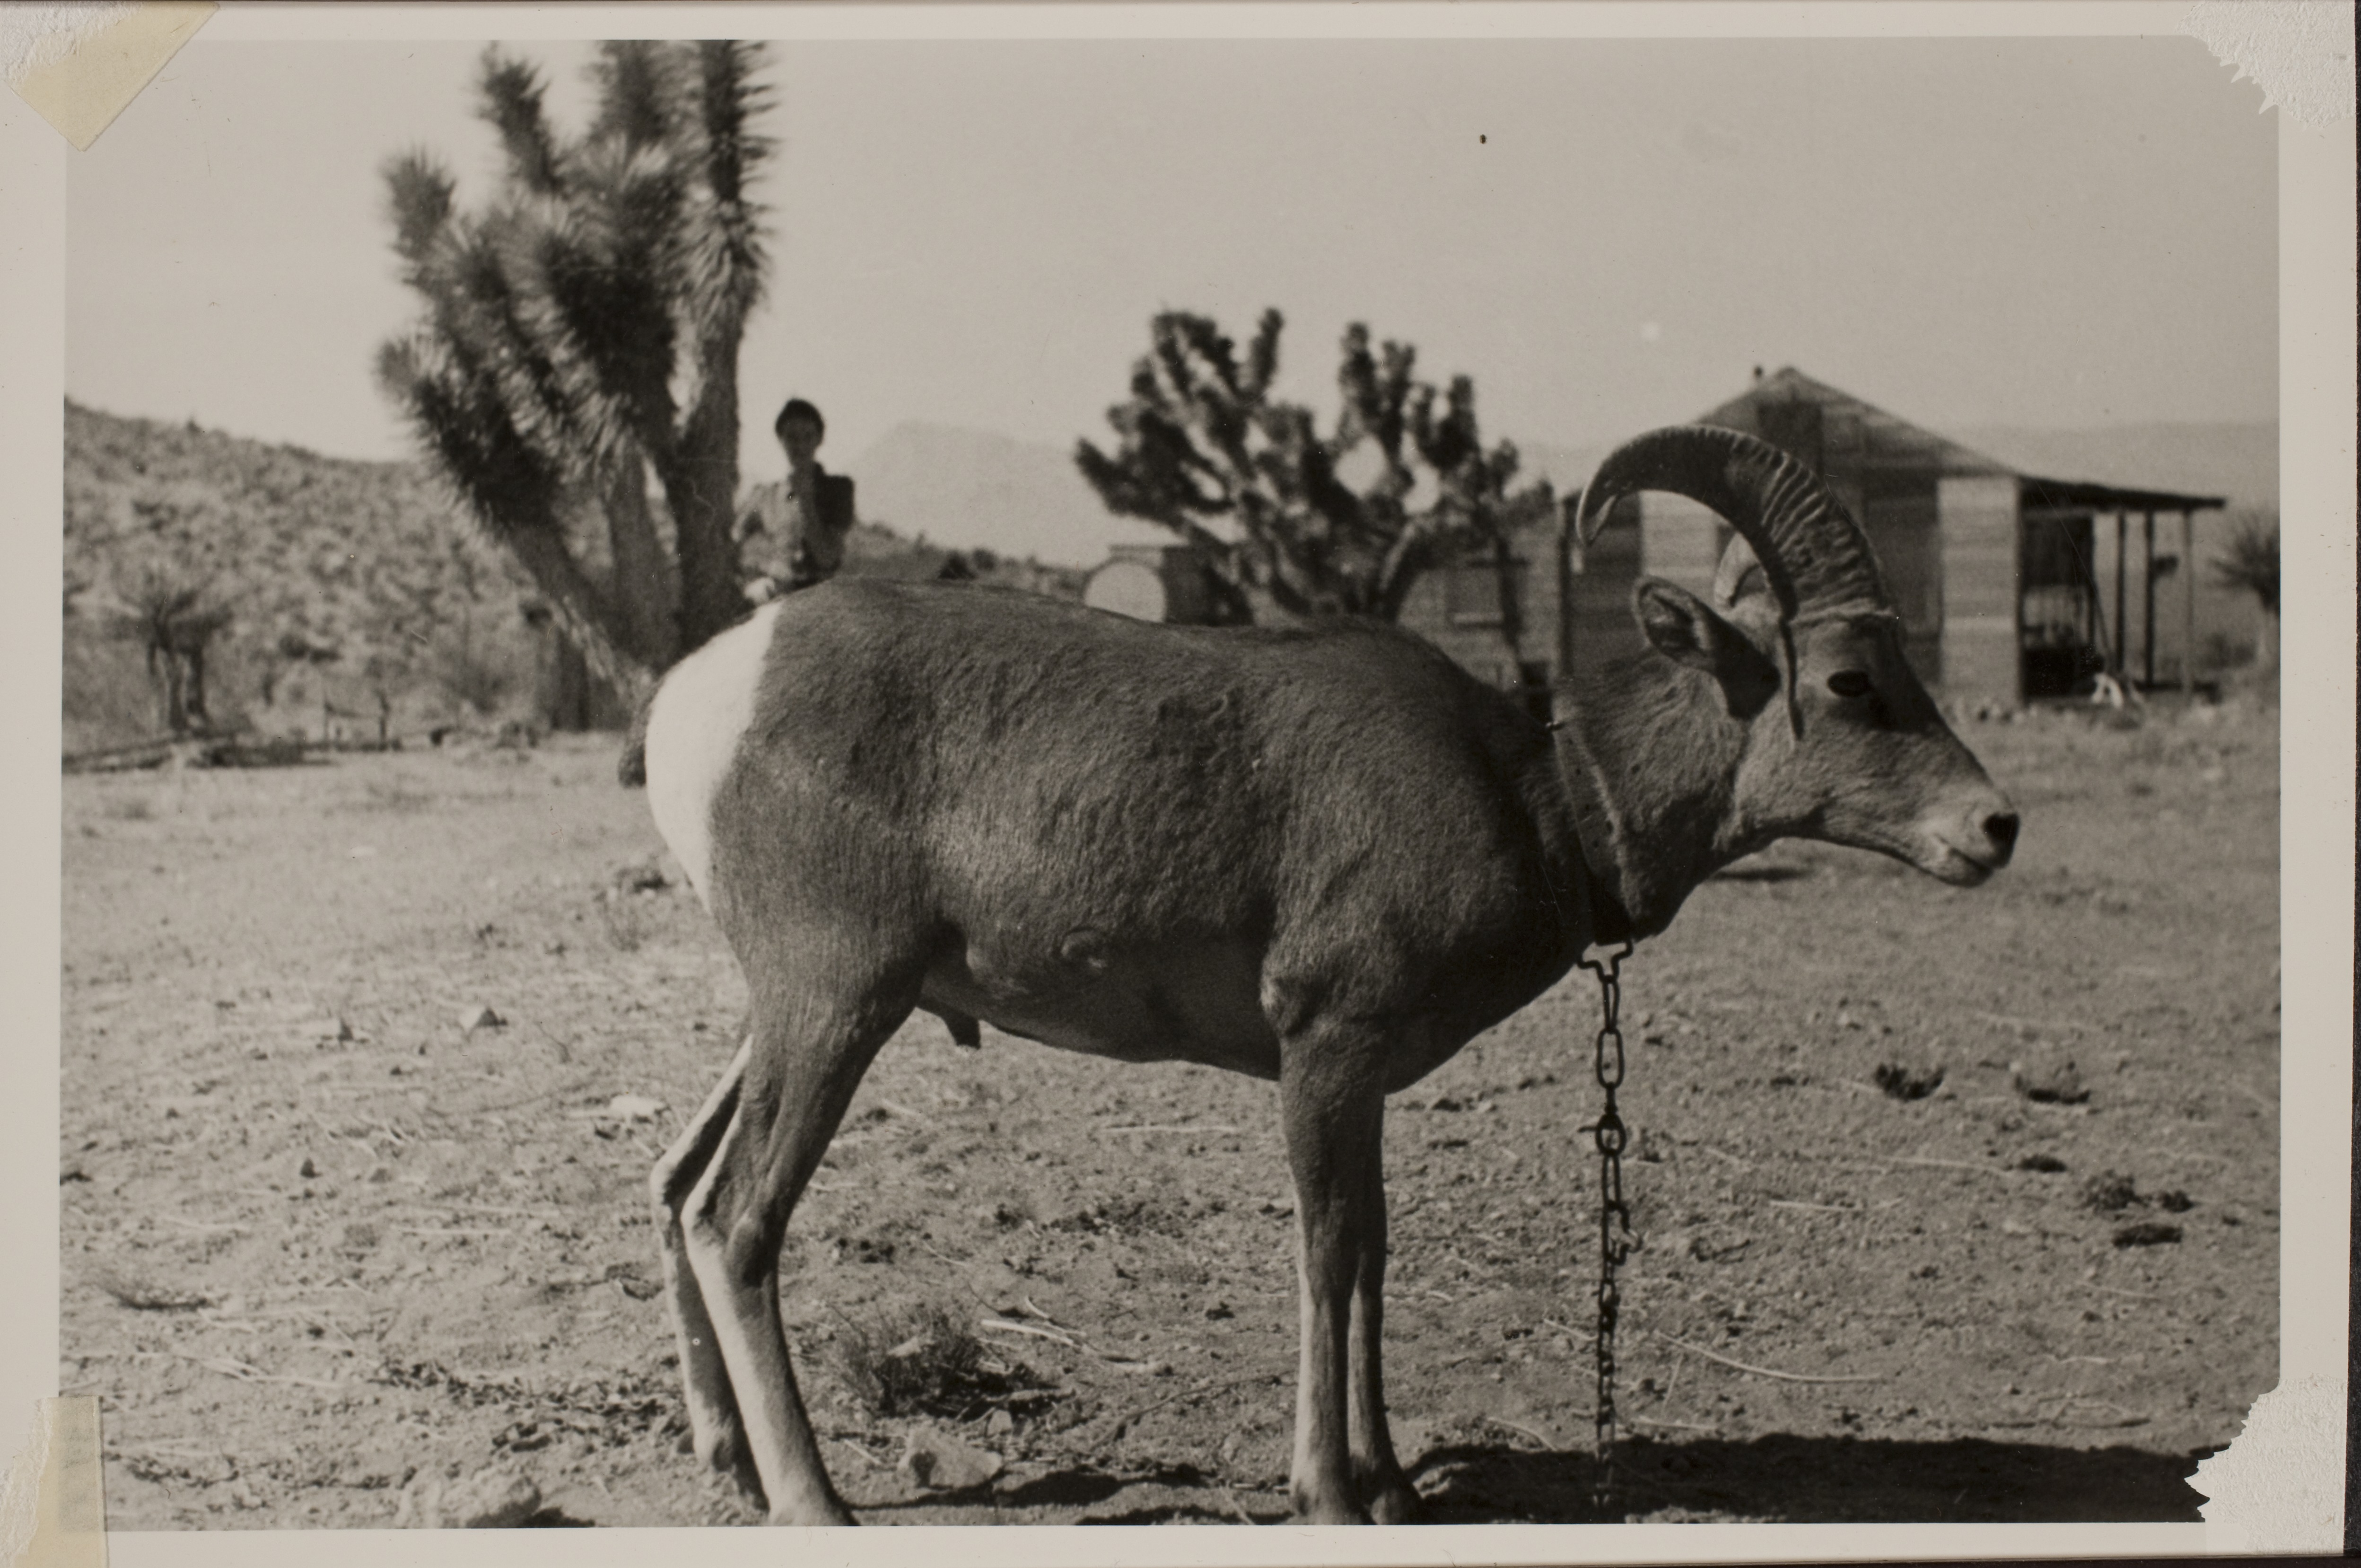 Billy the Bighorn sheep that was a pet at Walking Box Ranch, Nevada.  This photo is from an unidentified location: photographic print